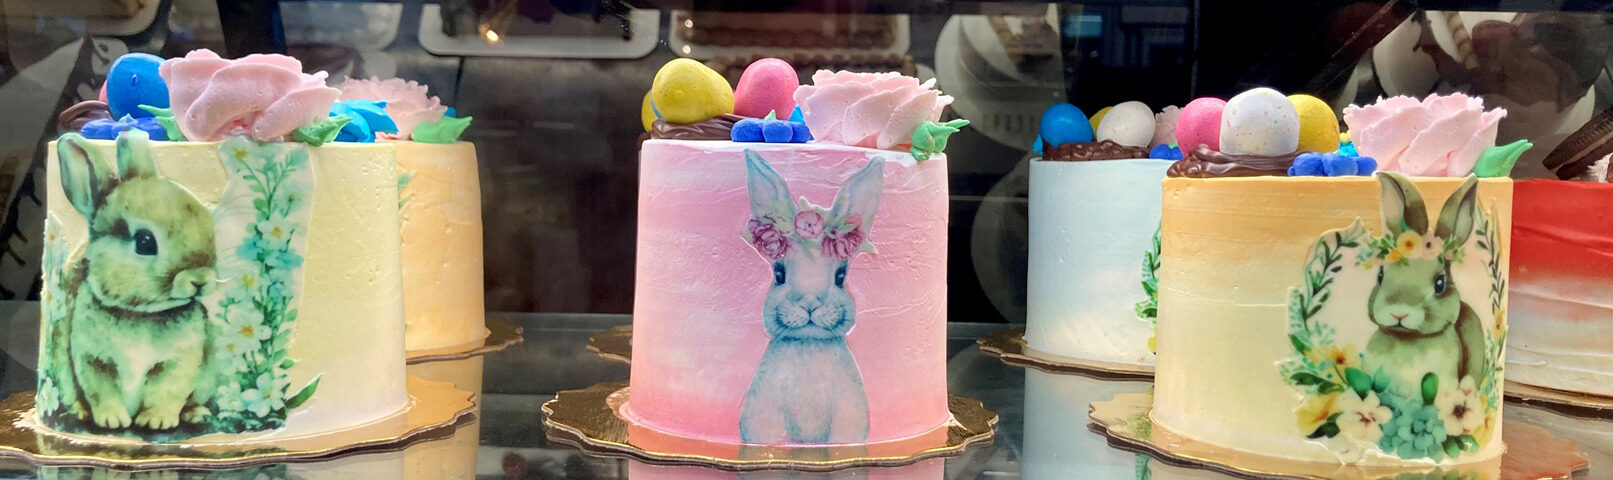 3 Cakes Decorated as Bunnies for Easter on Grand Cayman